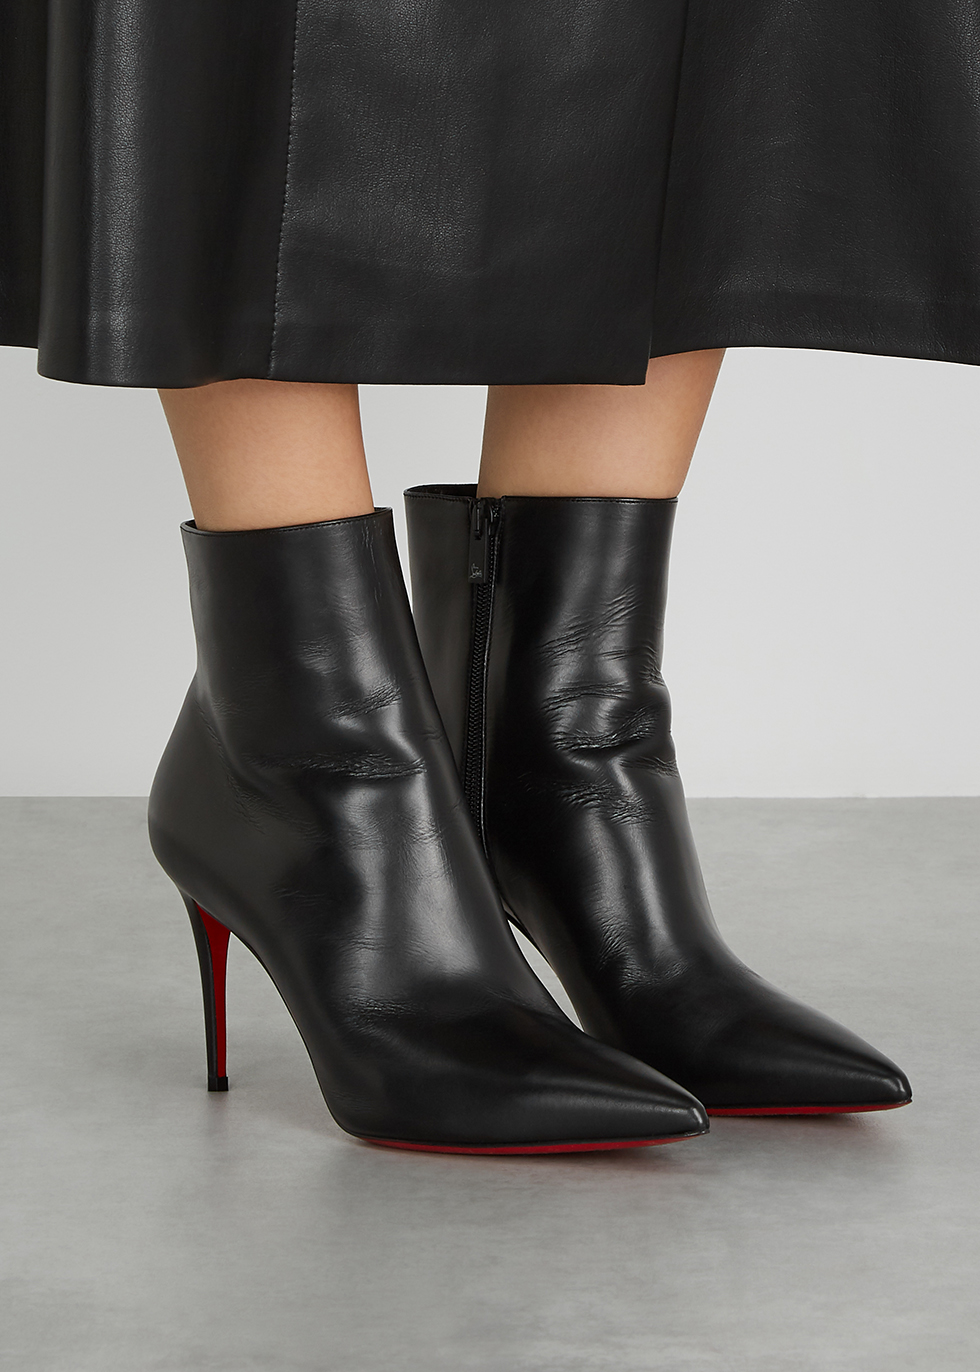 louboutin boots